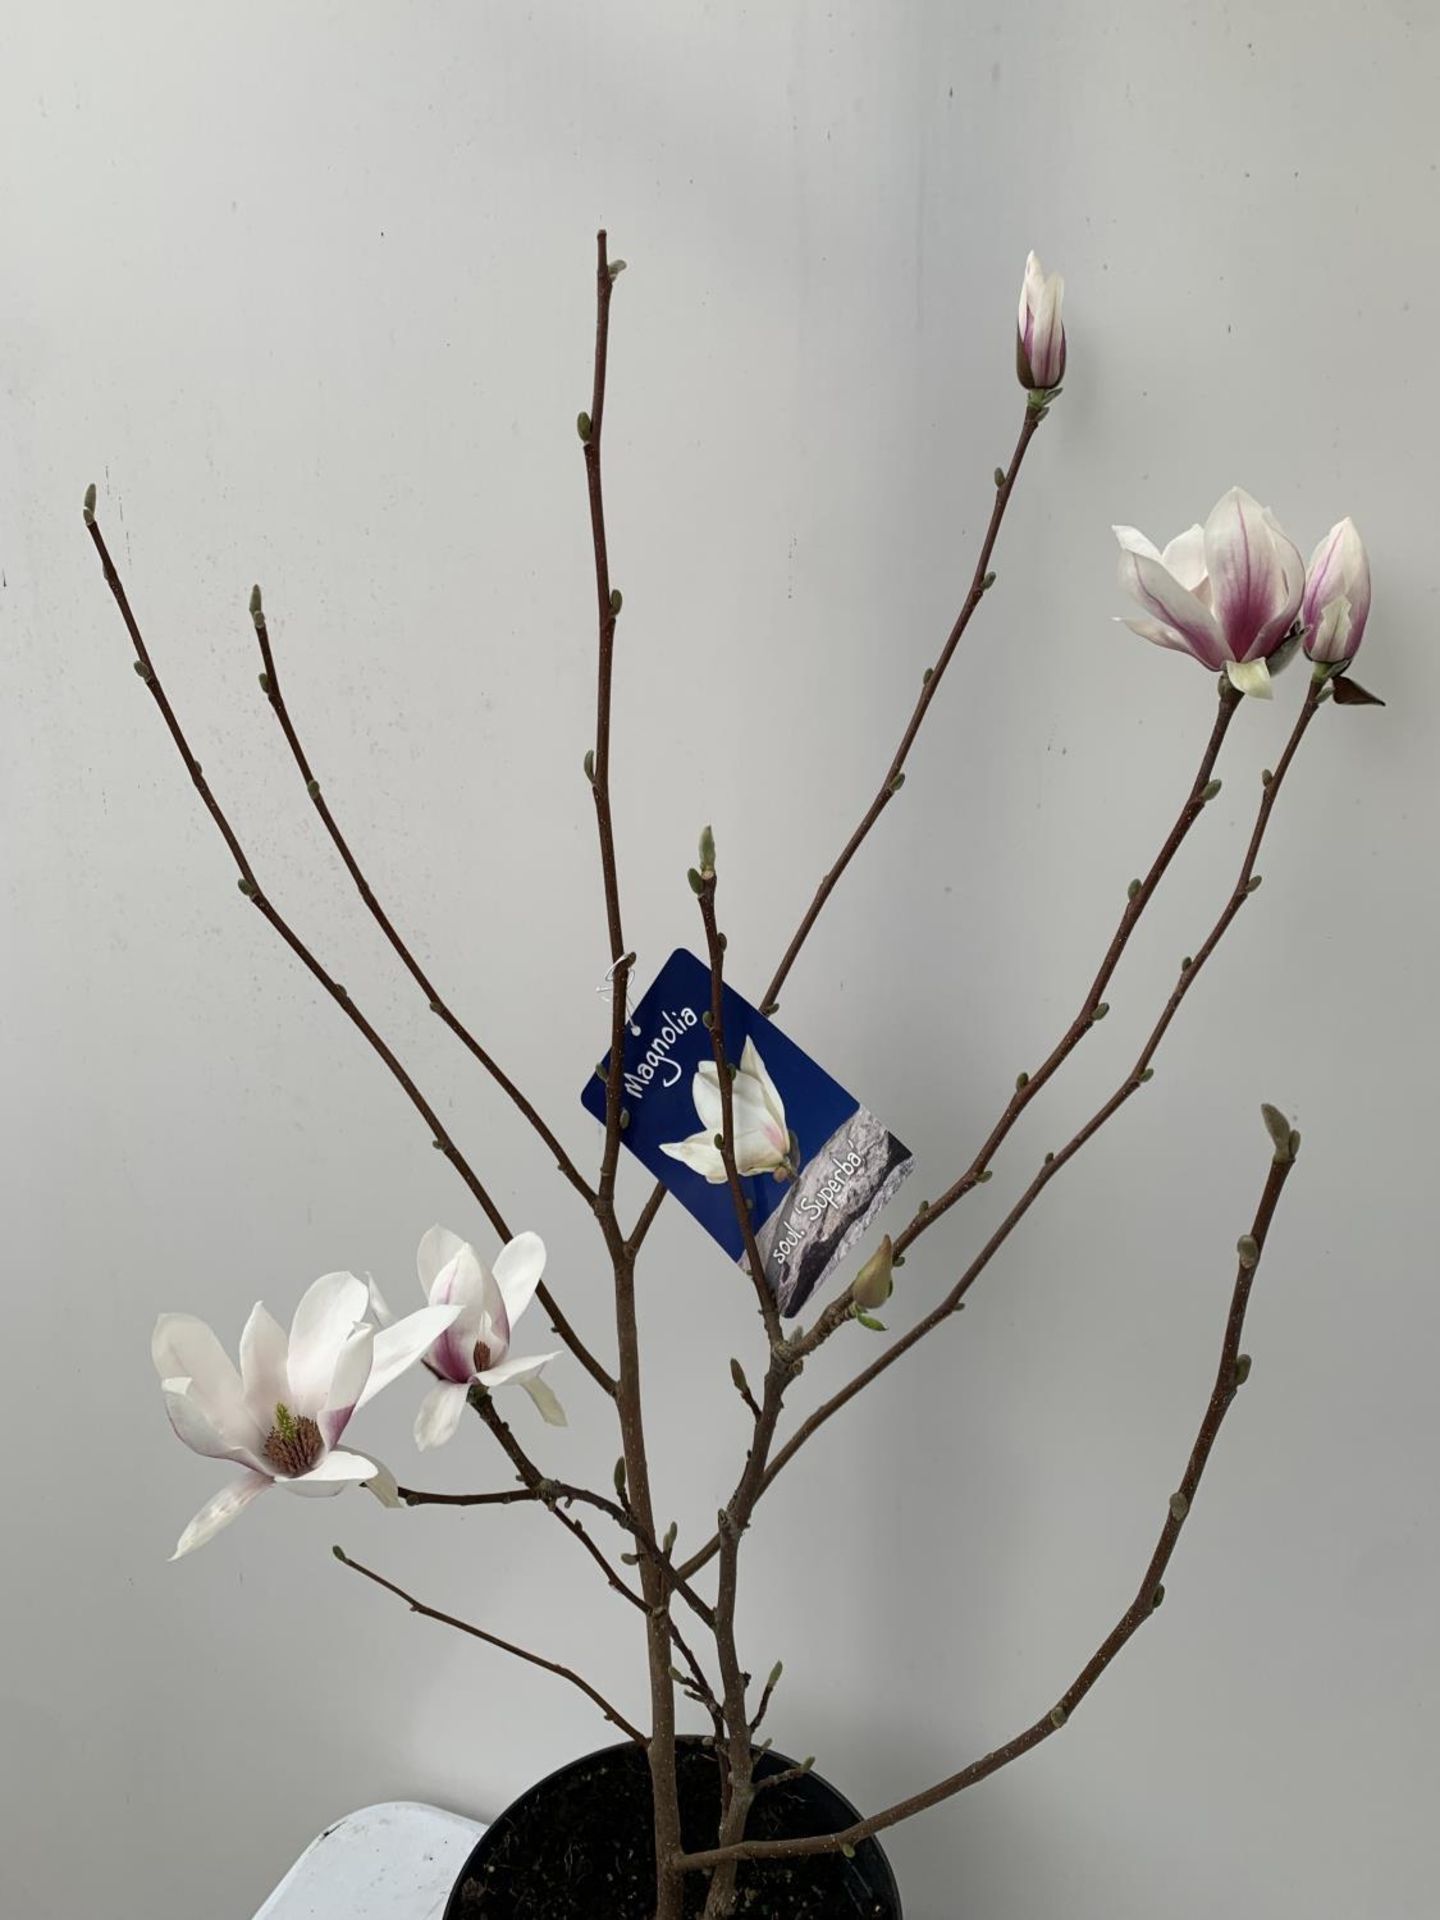 ONE MAGNOLIA SOULANGEANA 'SUPERBA' APPROX 120CM IN HEIGHT IN A 7 LTR POT PLUS VAT - Image 6 of 14